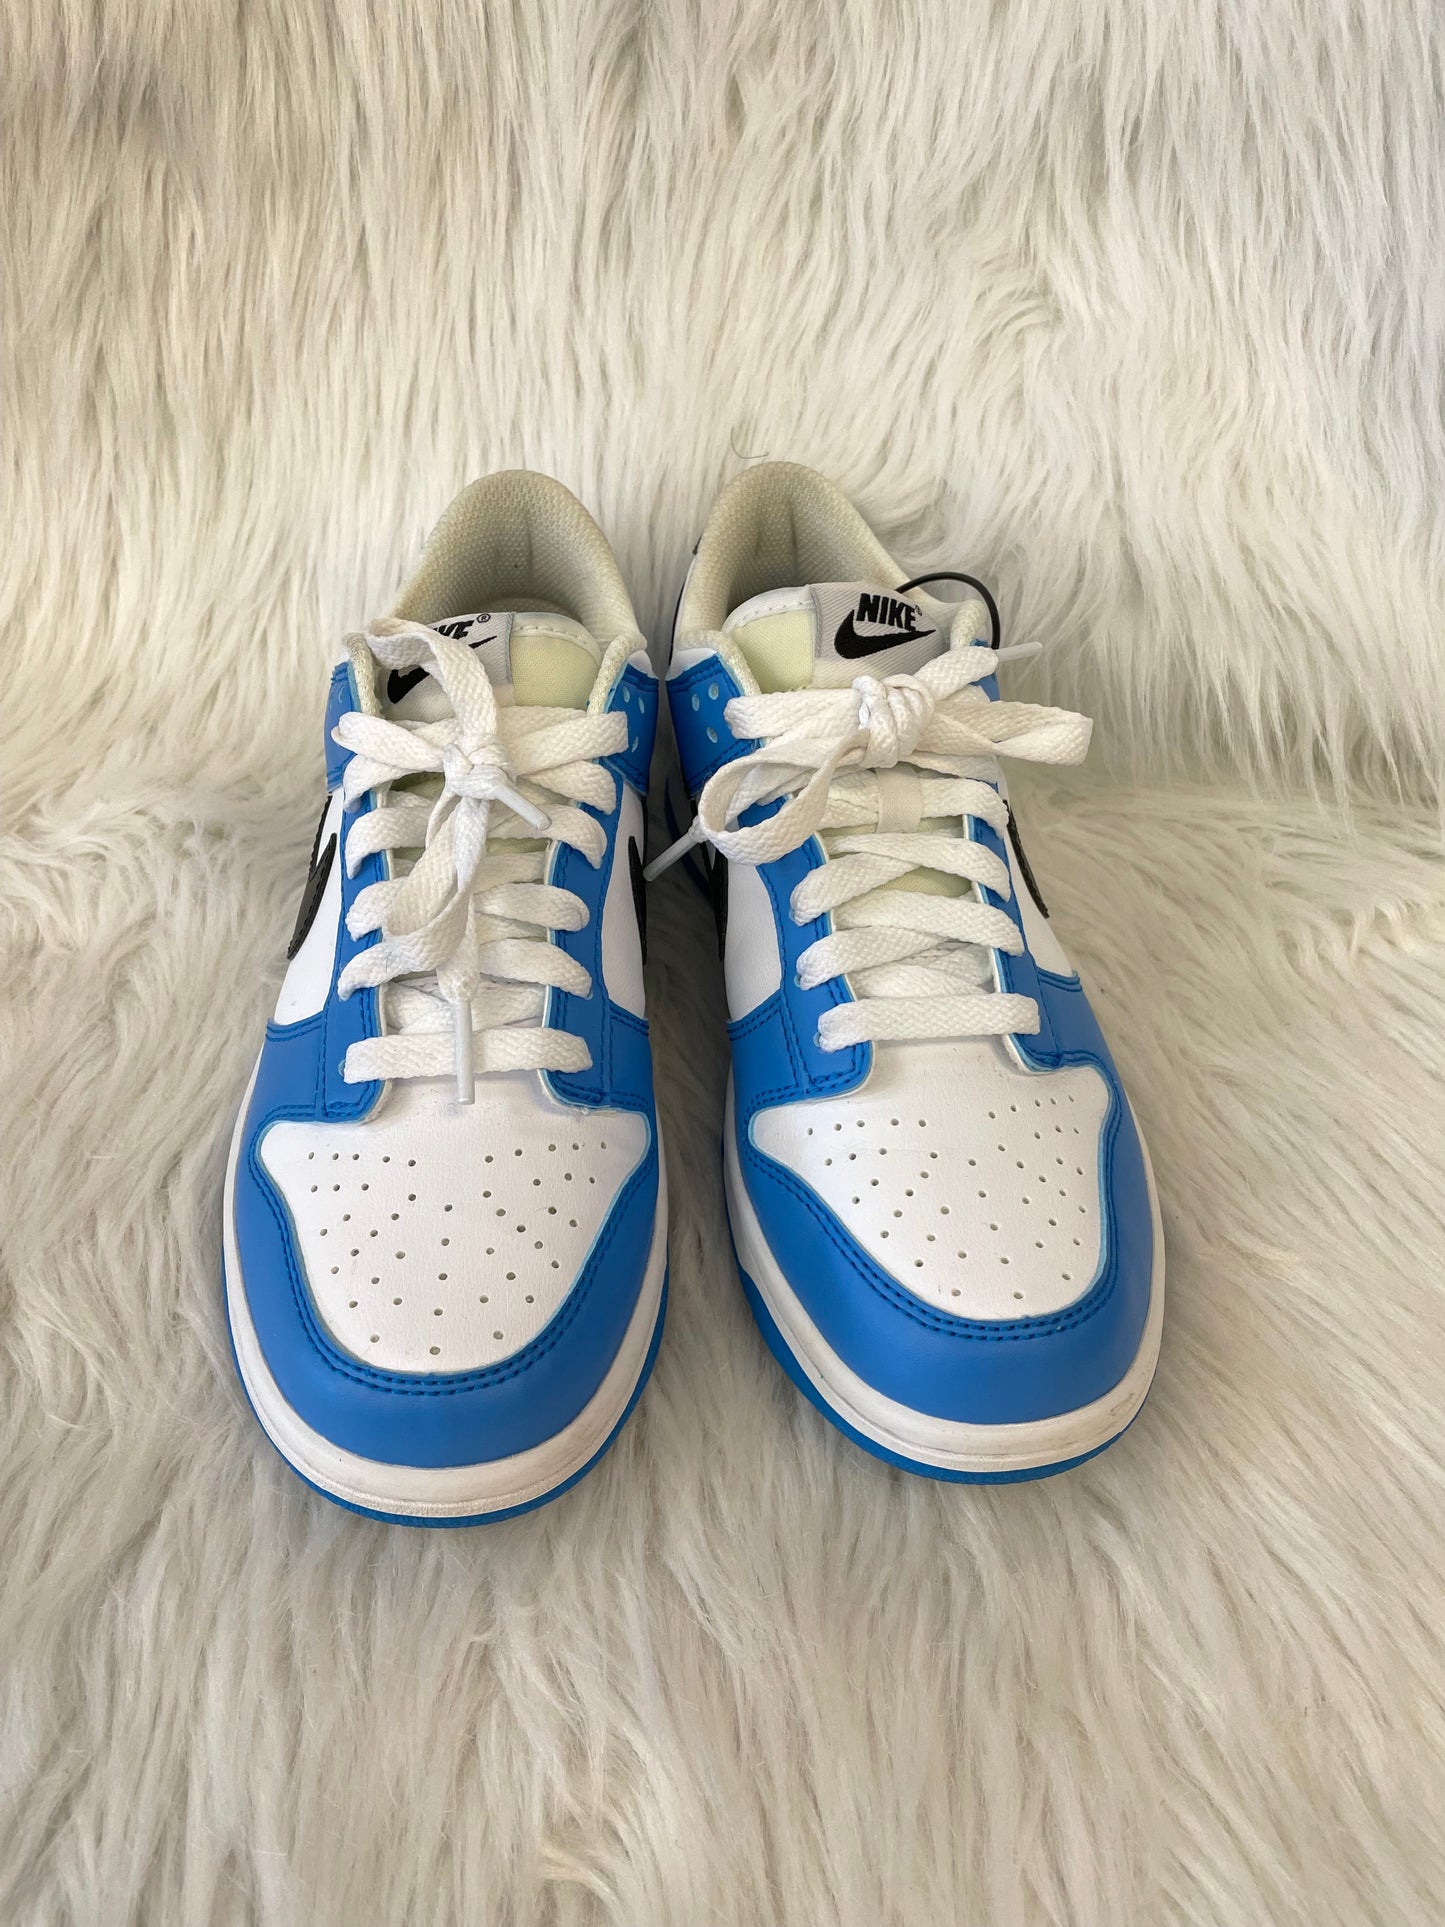 Blue & White Shoes Sneakers Nike, Size 6.5